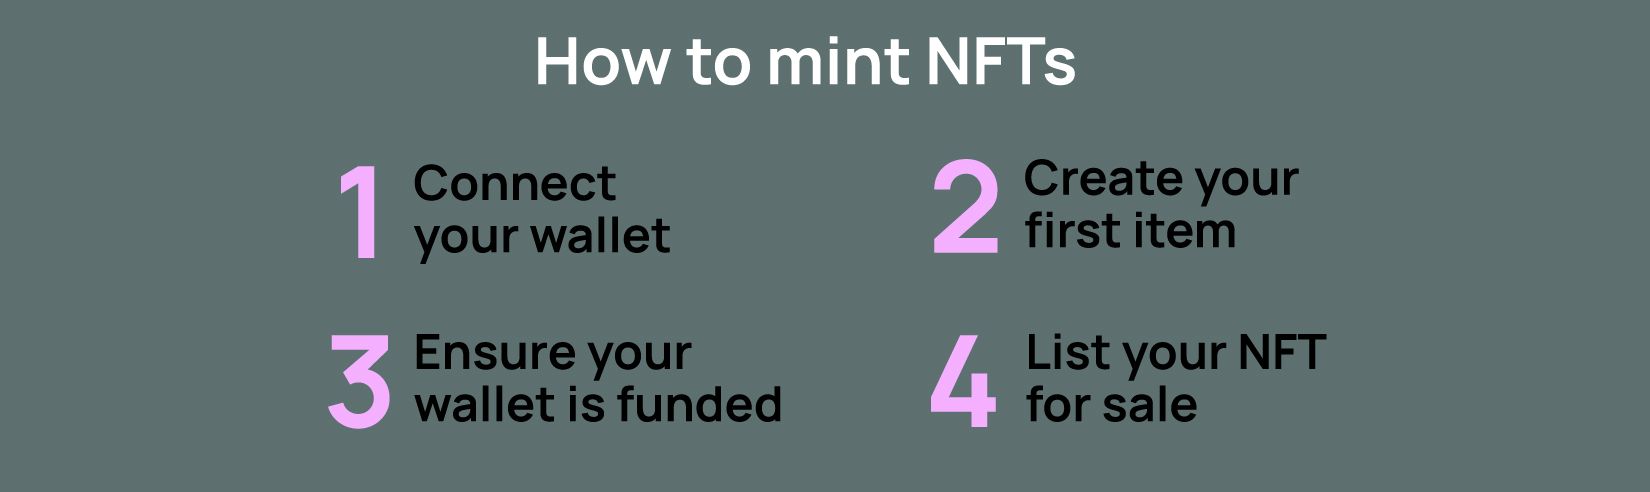 How to mint NFTs?